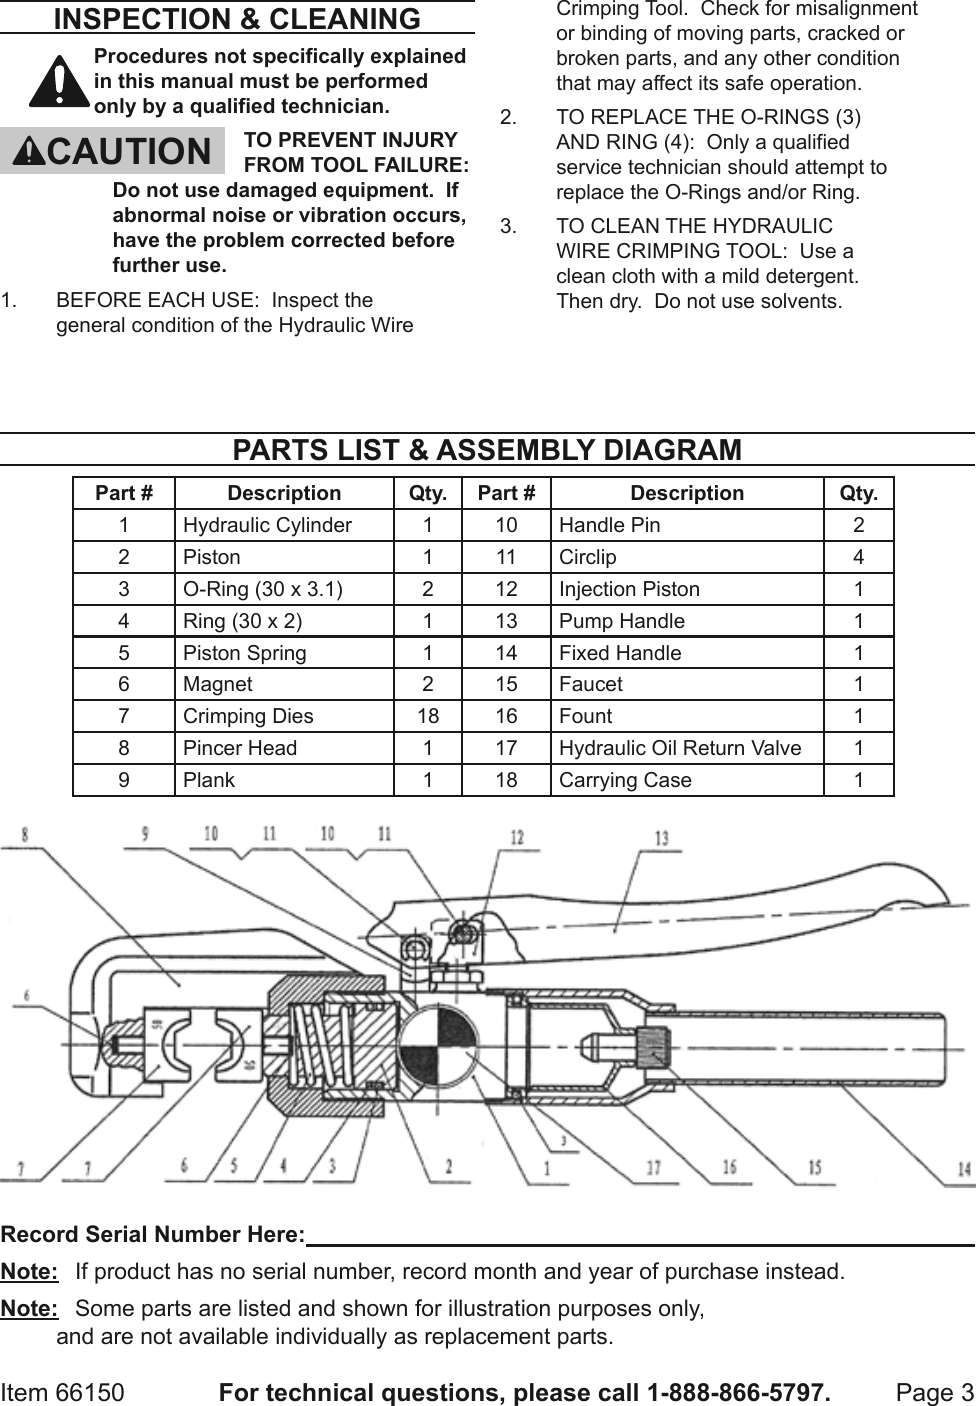 Page 3 of 4 - Harbor-Freight Harbor-Freight-Hydraulic-Wire-Crimping-Tool-Product-Manual-  Harbor-freight-hydraulic-wire-crimping-tool-product-manual